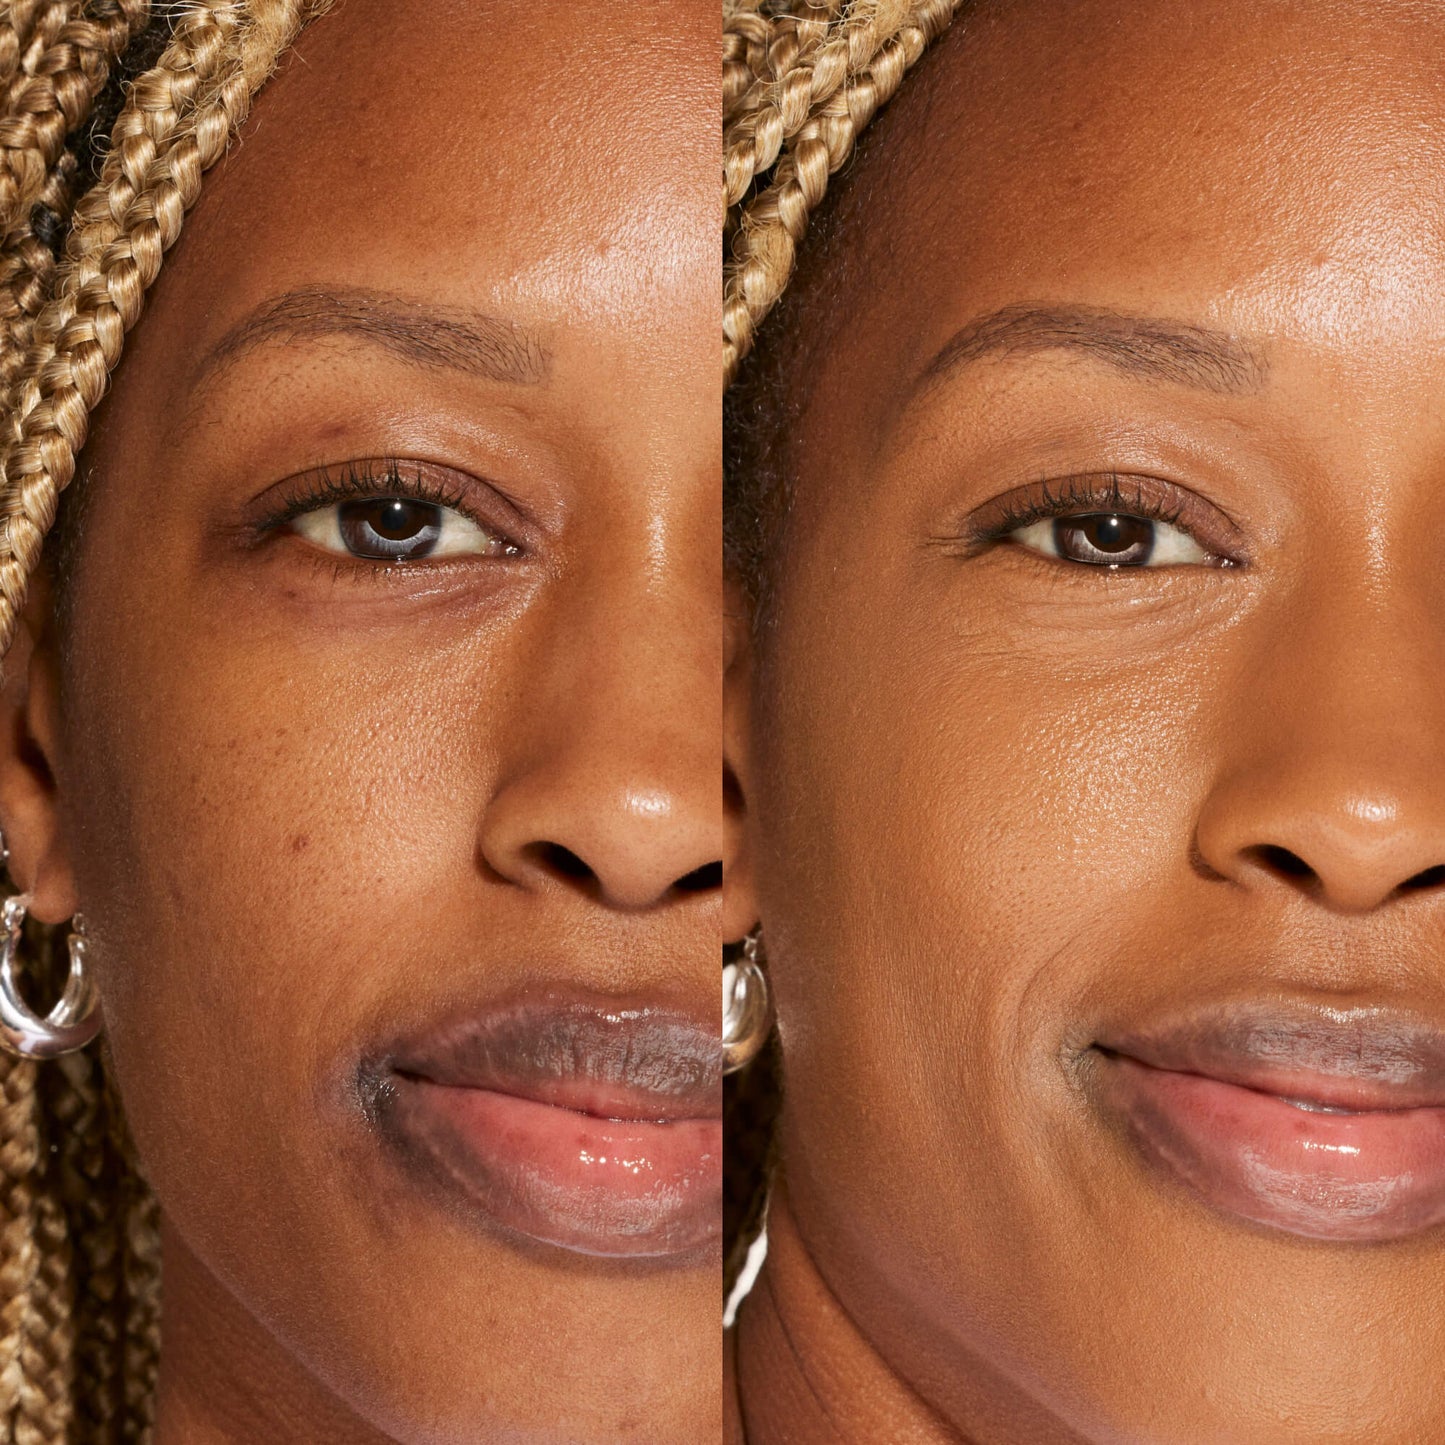 16.0 SB [A person's face before and after using Tower 28 Beauty's Swipe Serum Concealer in shade 16.0 SB to cover up dark circles, blemishes, and discoloration]